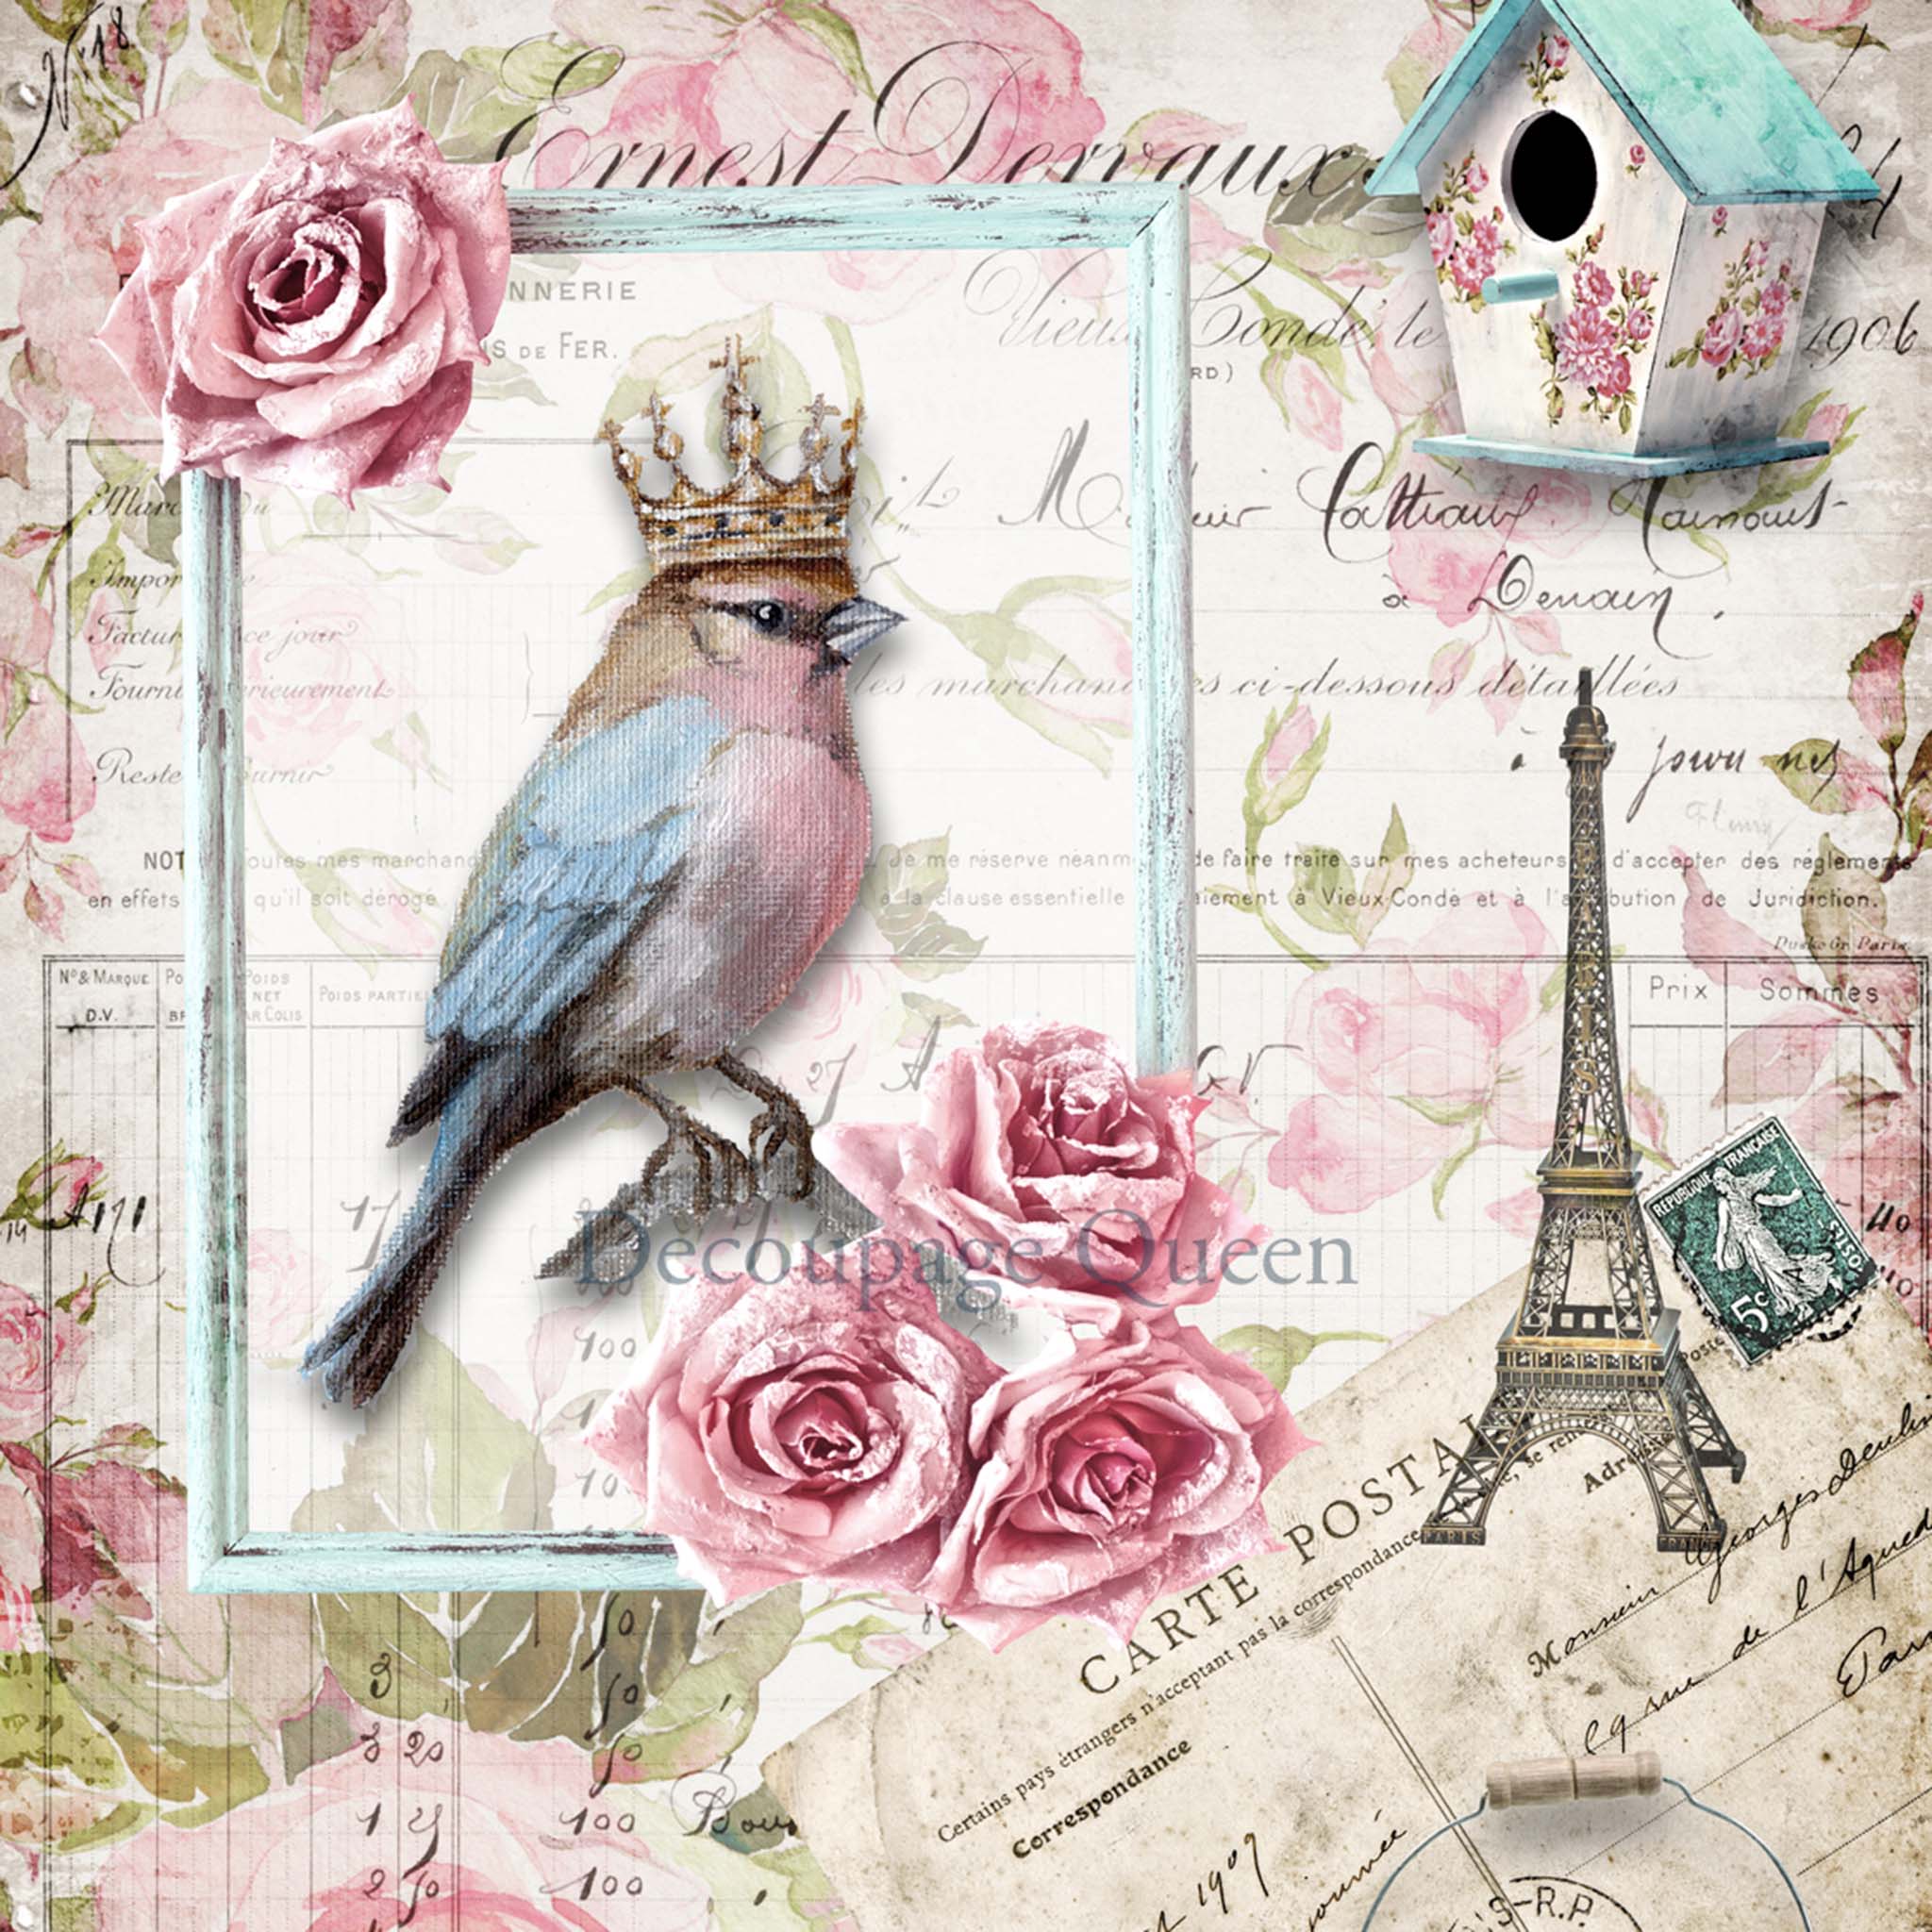 Close-up of an A1 rice paper design that features a small bird wearing a crown perched in a picture frame, surrounded by iconic Parisian elements like the Eiffel Tower, a birdhouse, and a French postcard against a floral background.